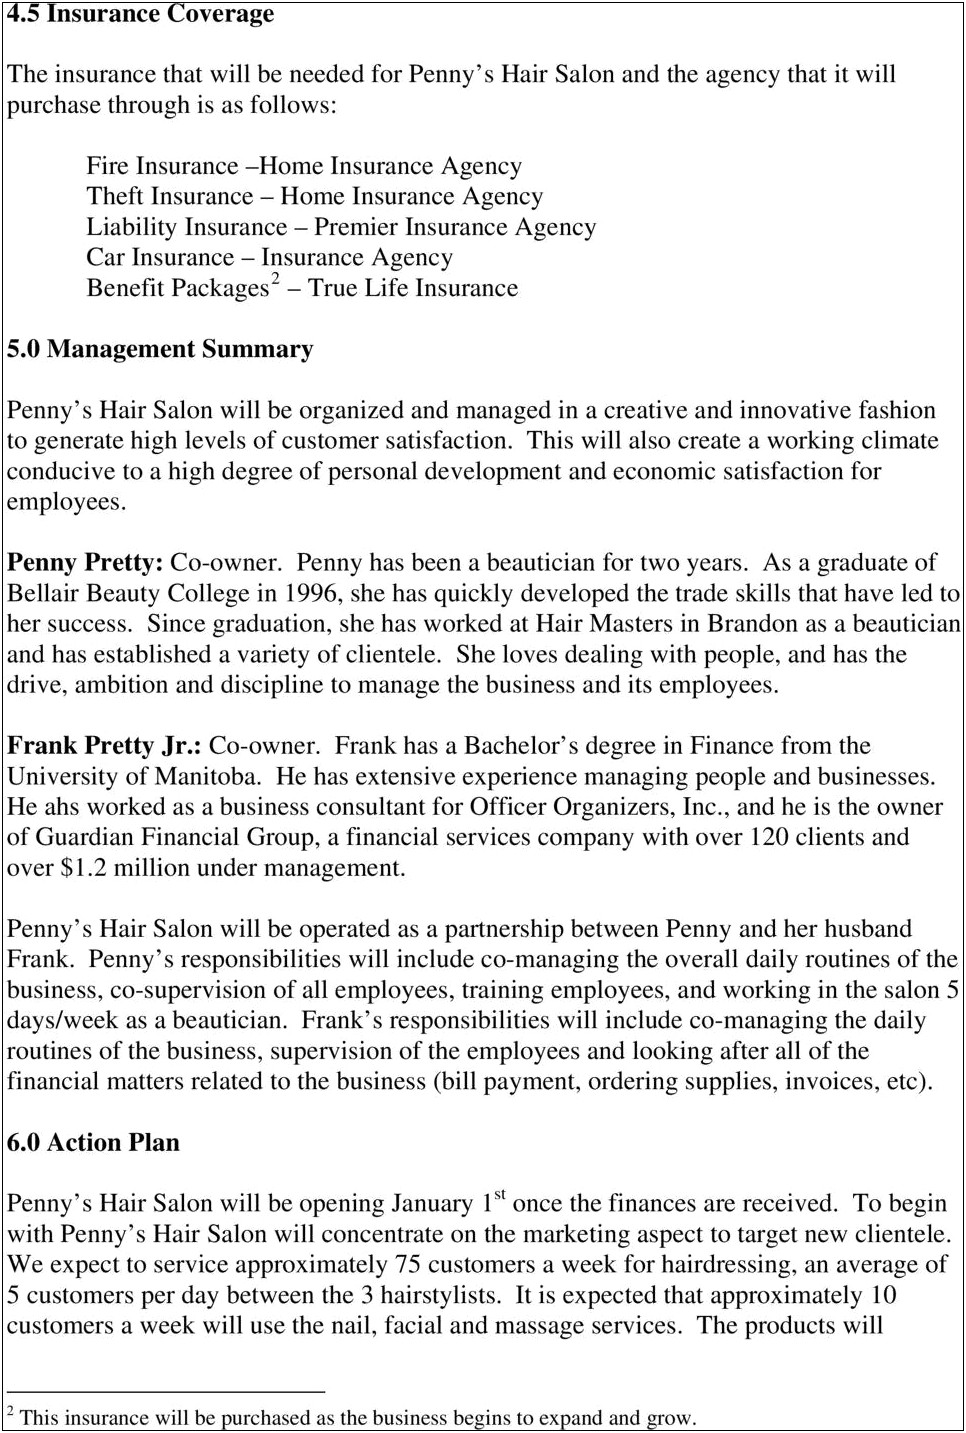 Business Plan Free Template For Salon